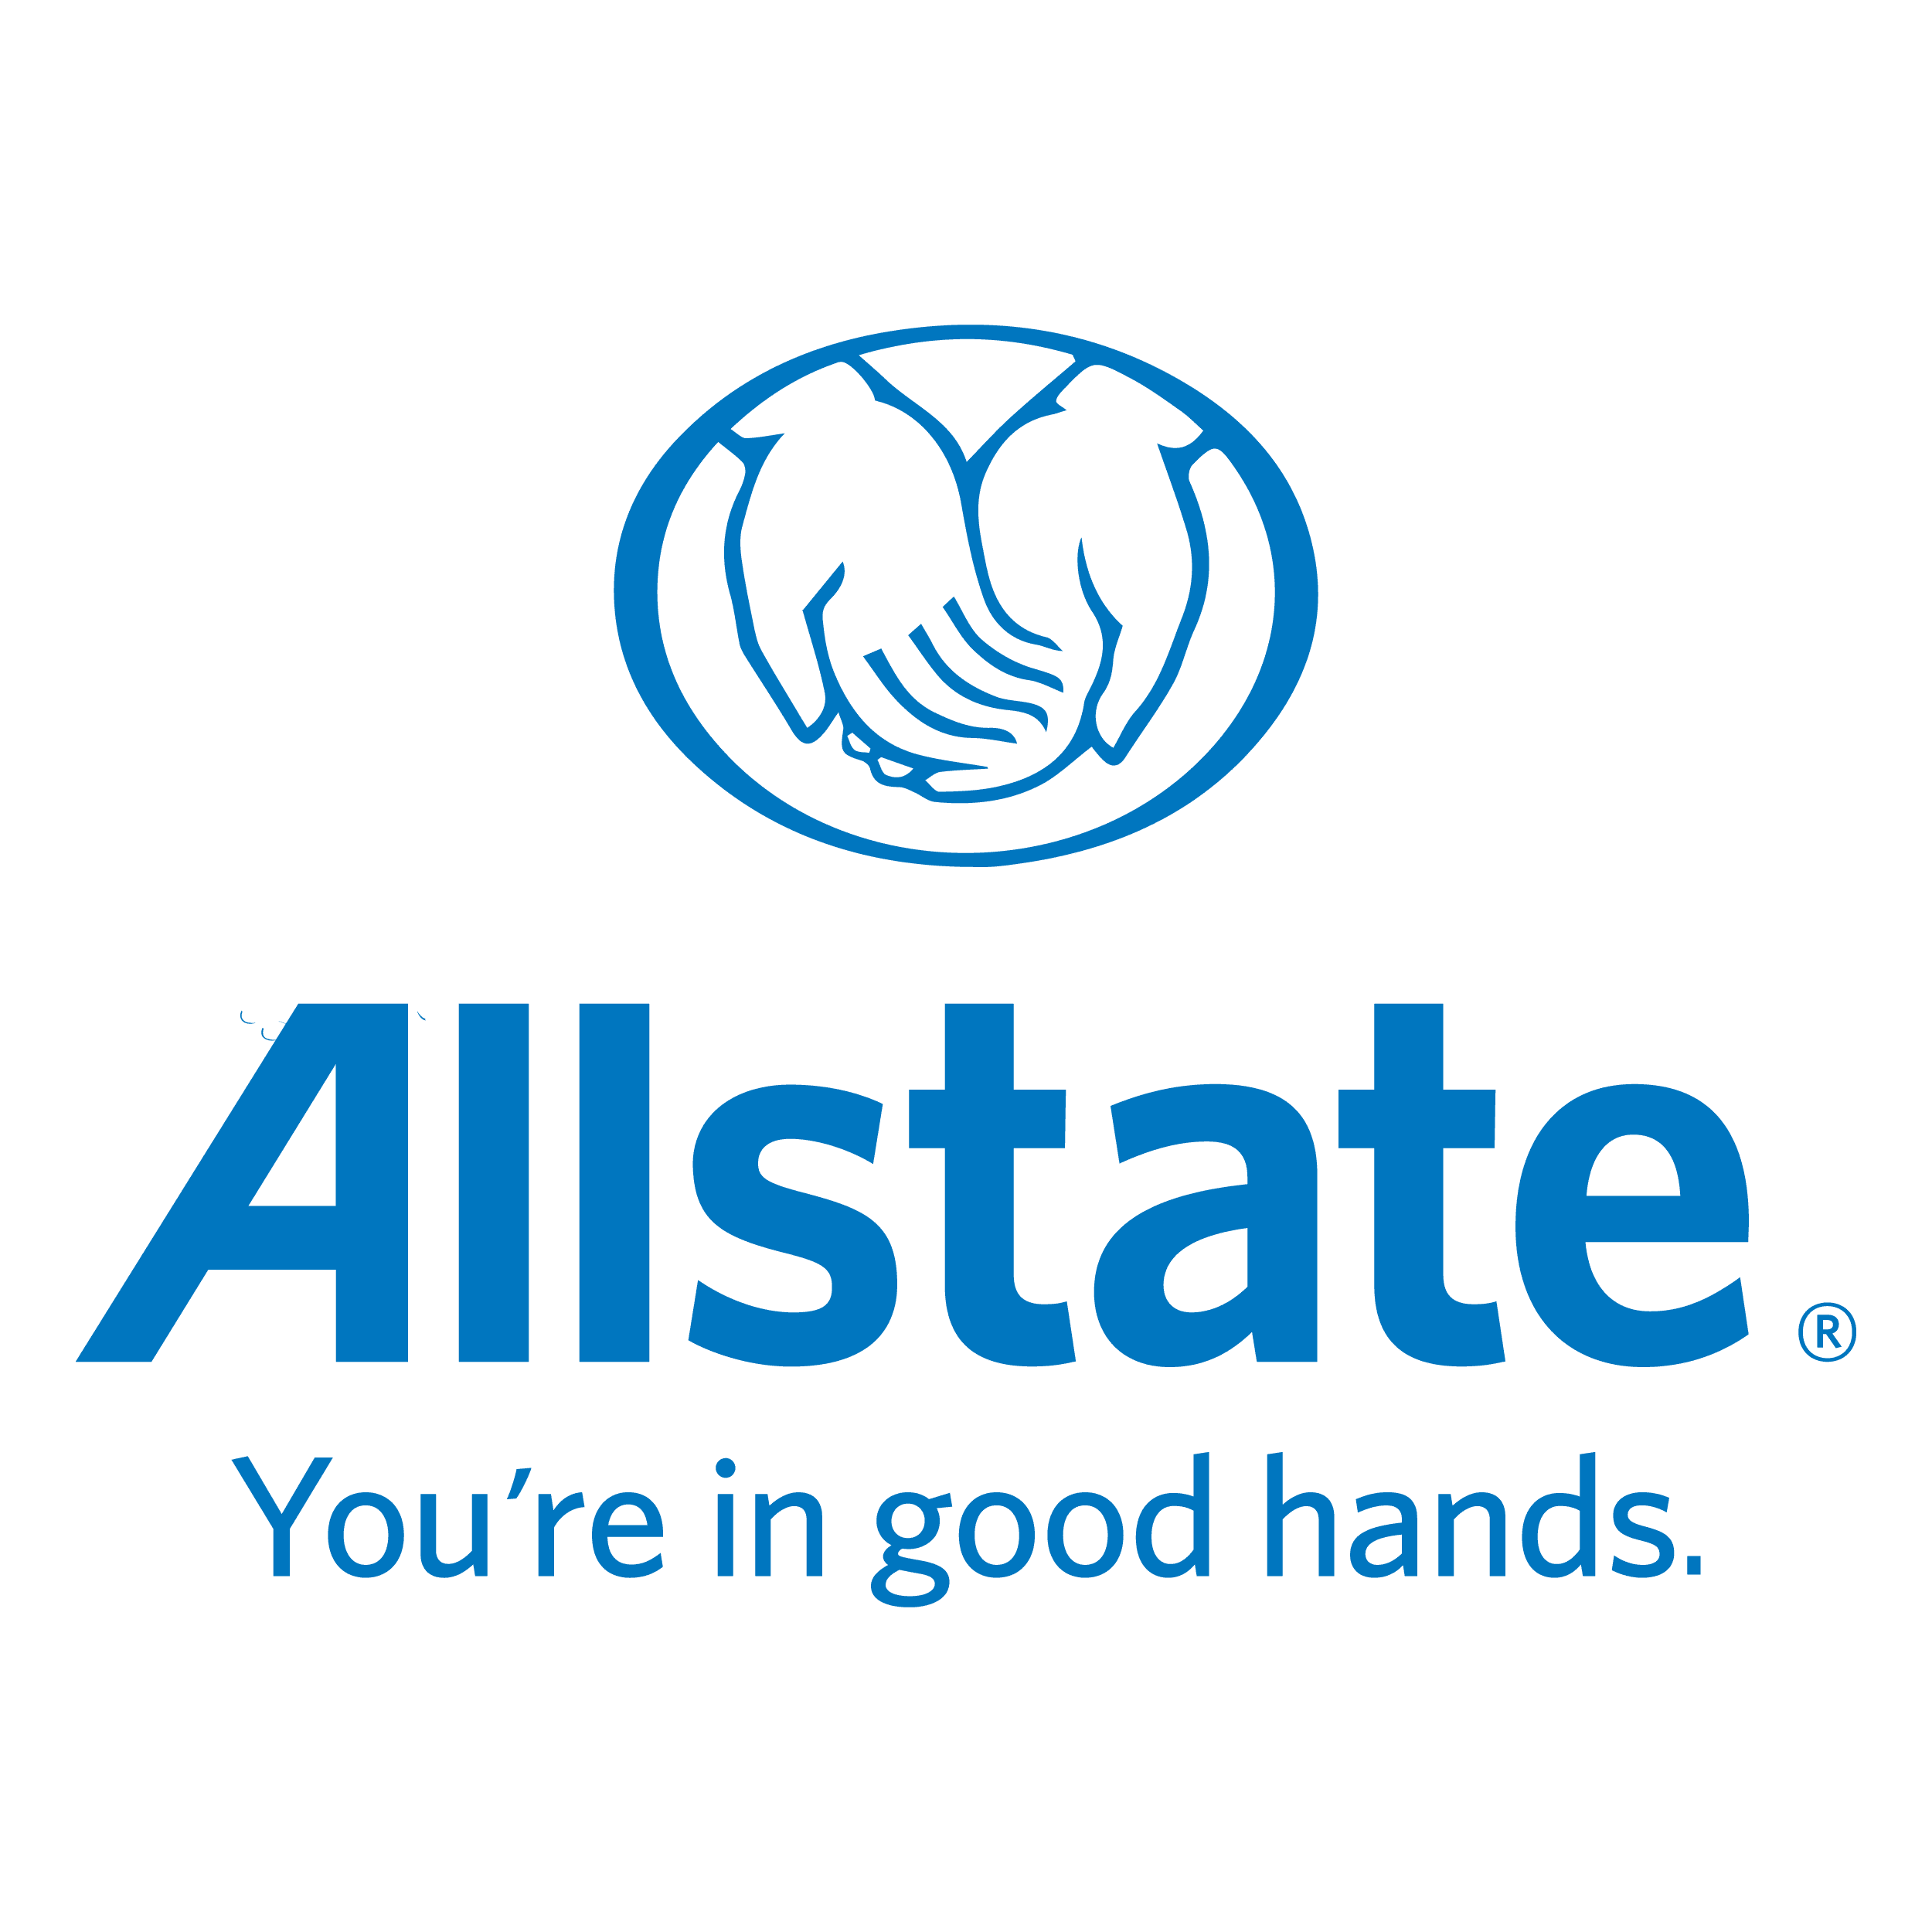 RAAM | Realty Advisors and Asset Managers, Inc. - Allstate